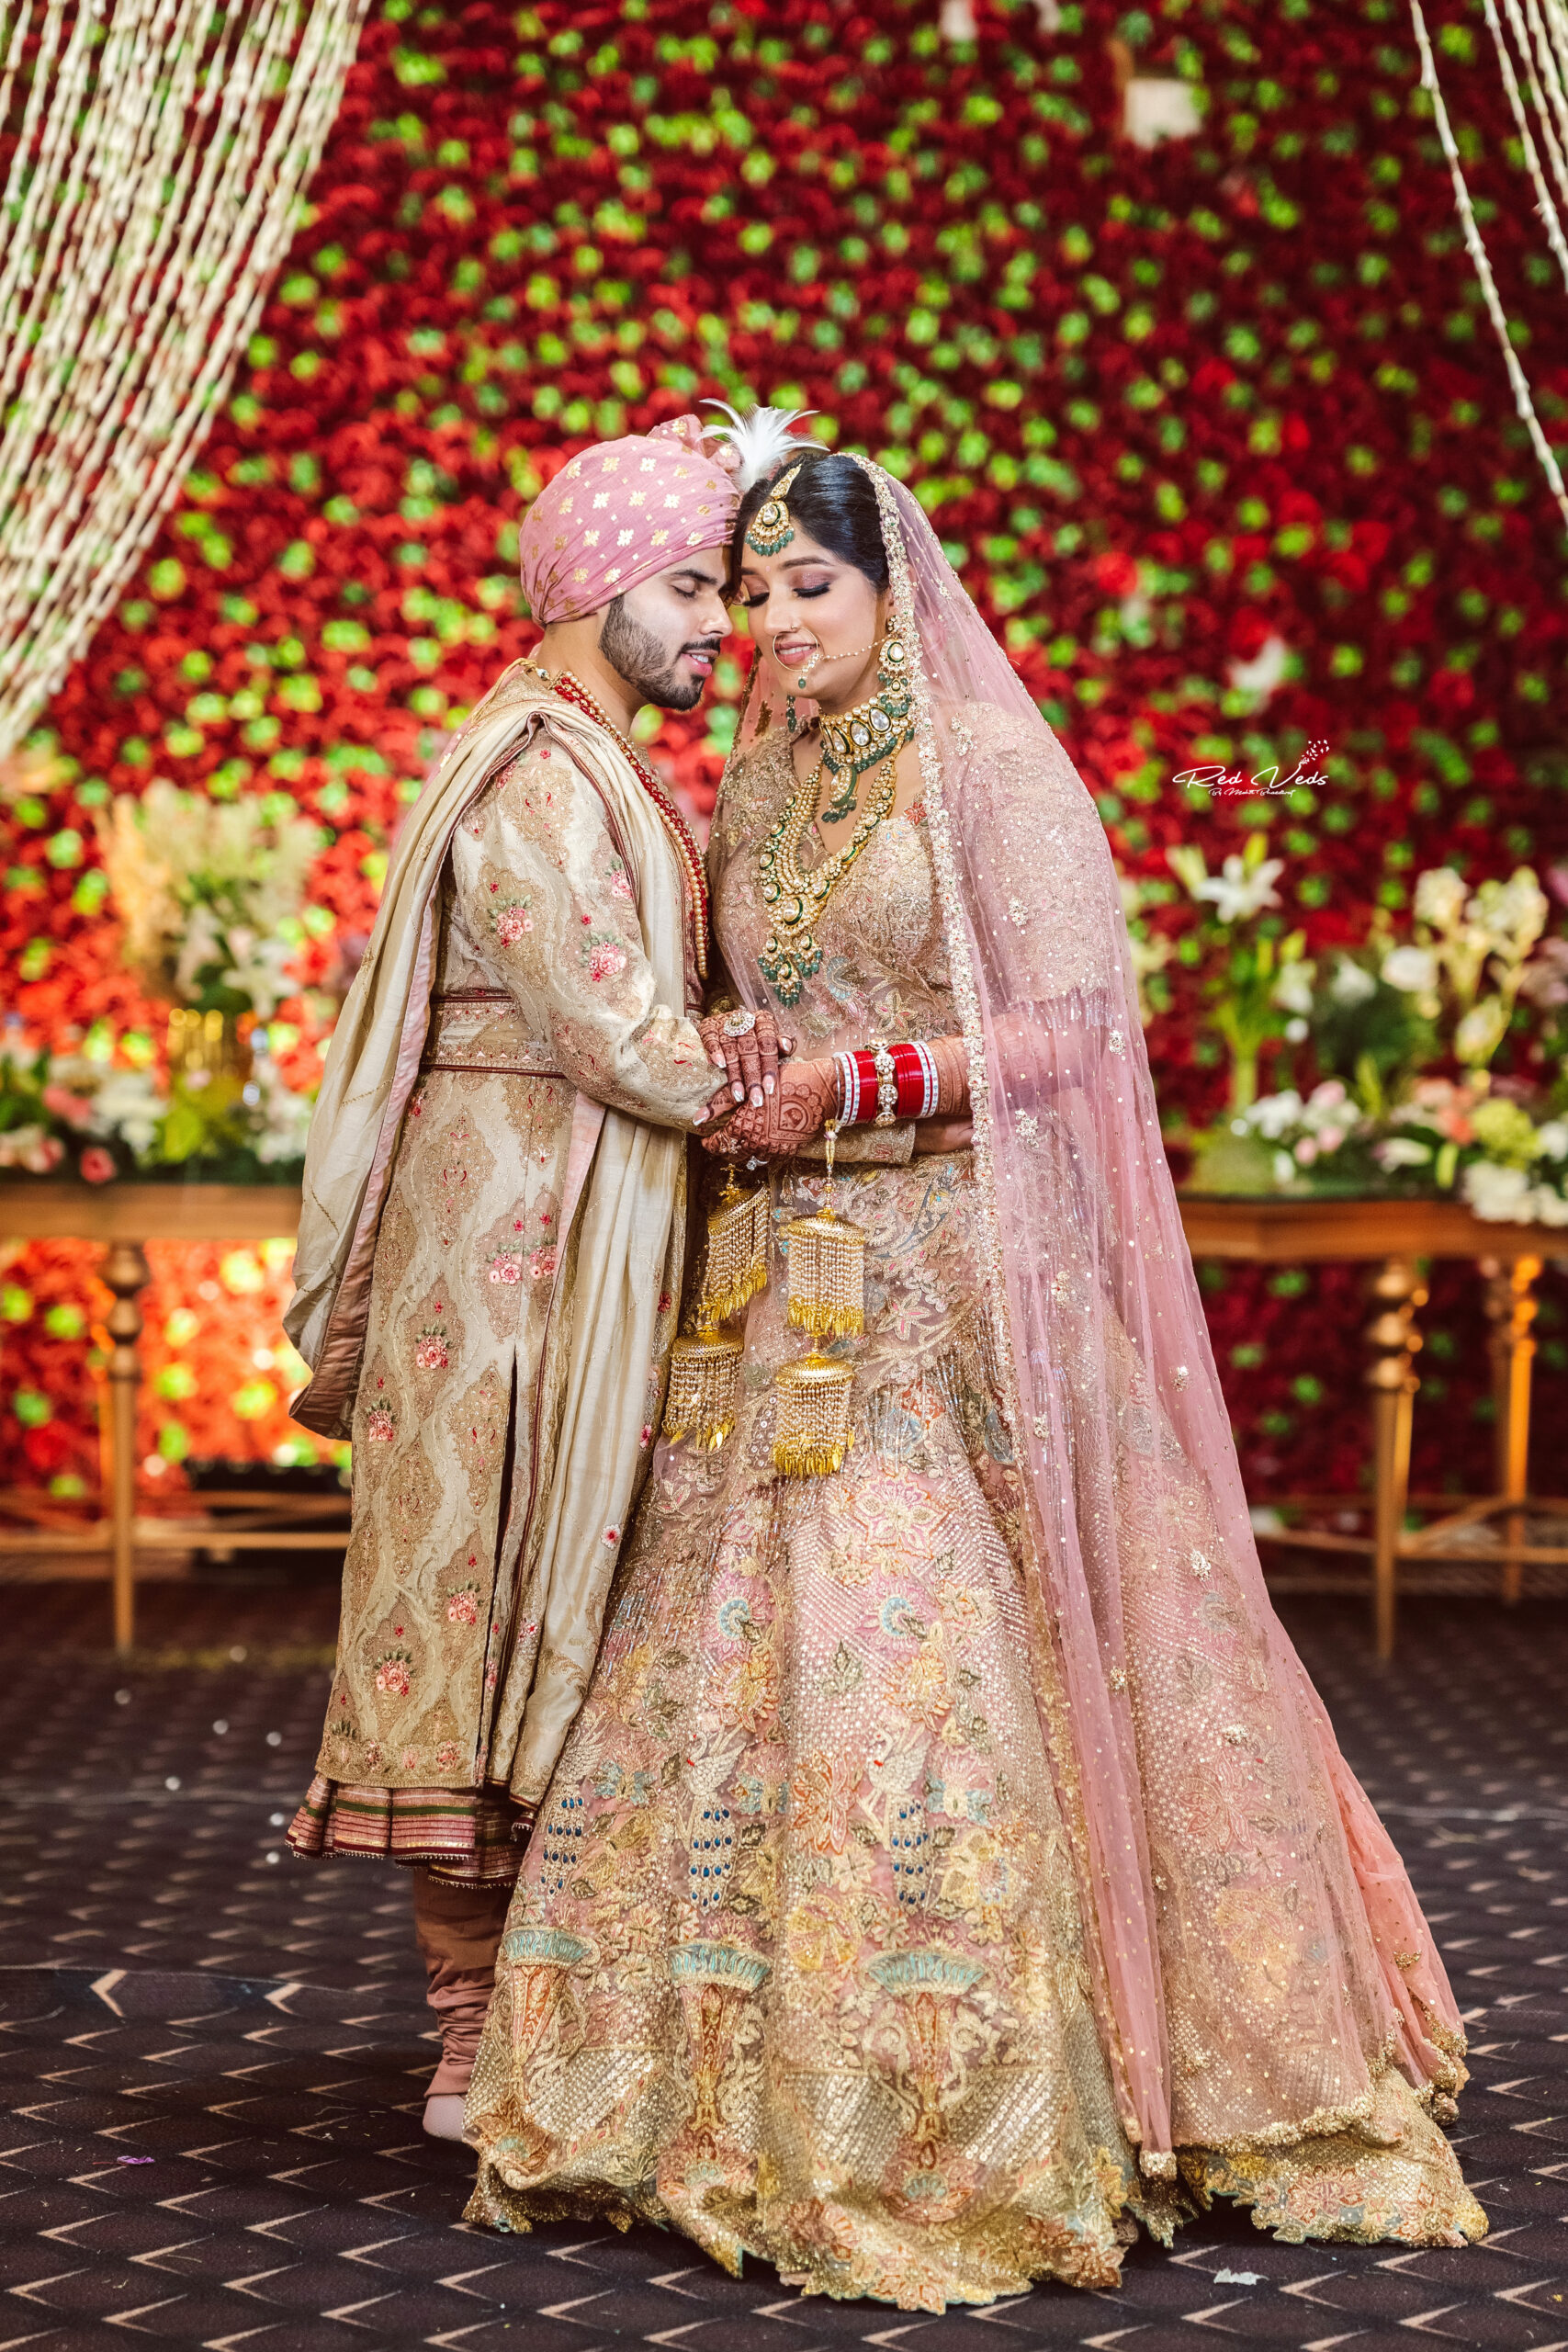 Gorgeous Wedding With Breathtaking Bridal Outfits | Indian wedding  photography couples, Couple wedding dress, Wedding couple poses photography